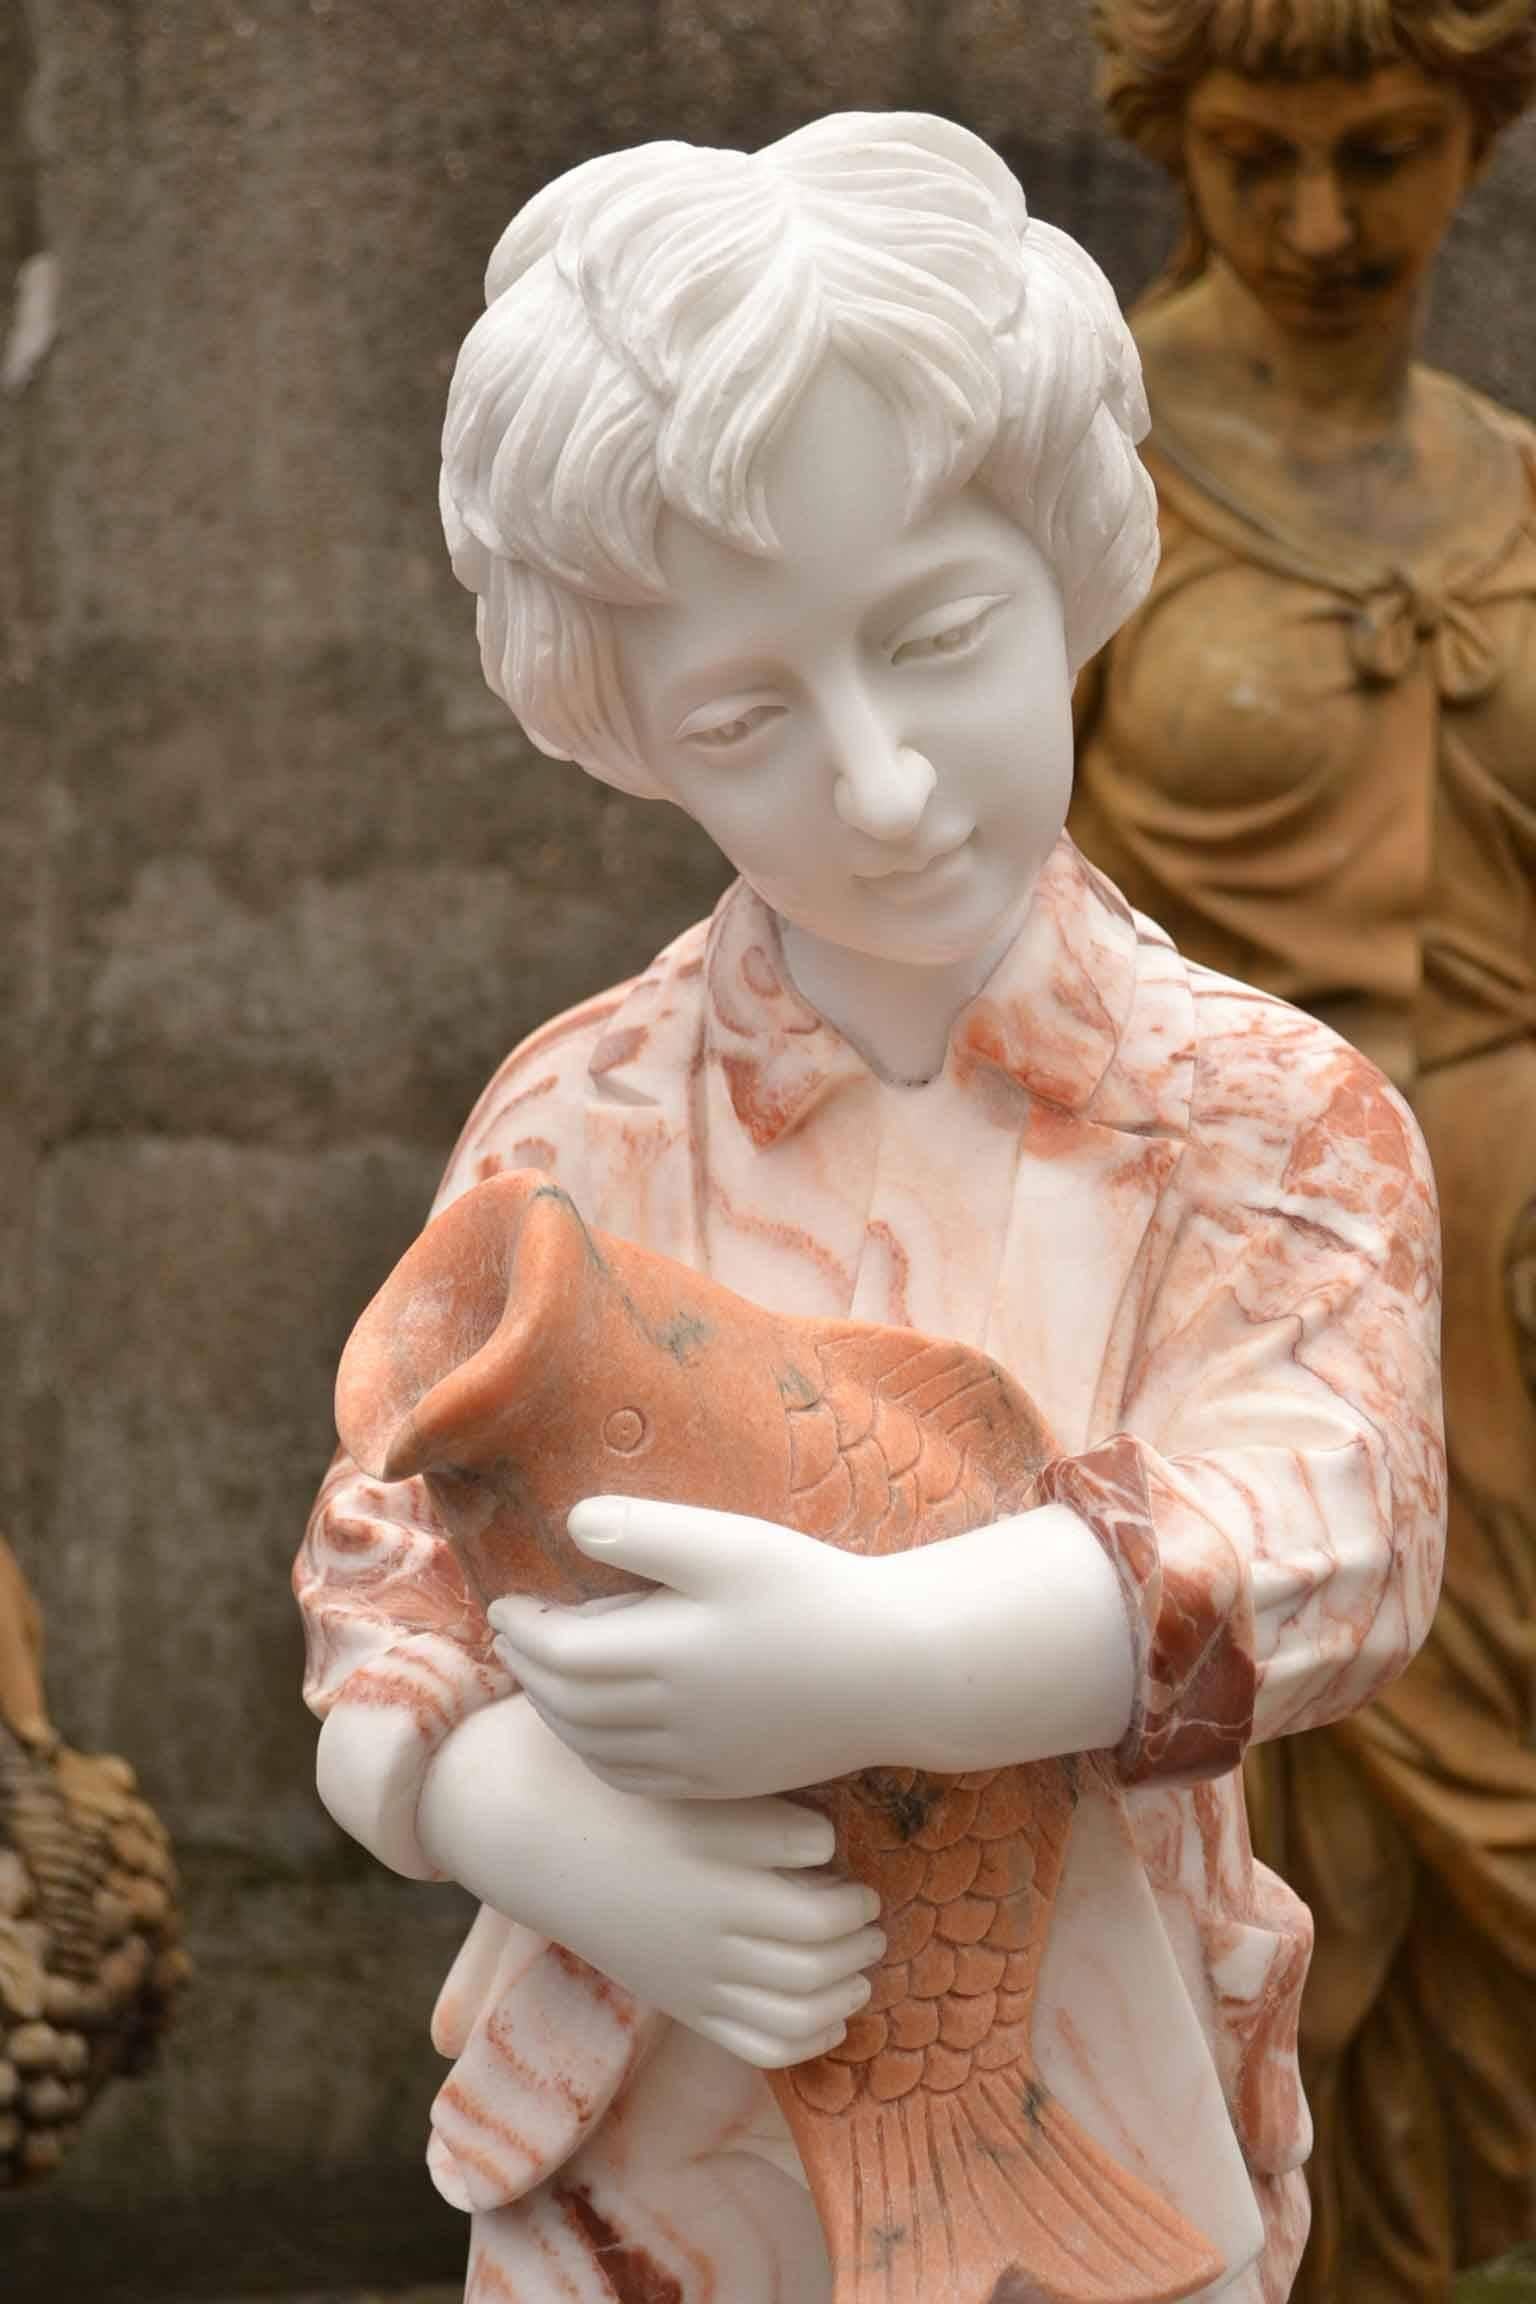 This is a beautiful multi-color marble fountain statue of a young girl with a swan at her feet holding a fish, dating from the last quarter of the 20th century.

This magnificent work of art is hand-carved from solid blocks of Italian Carrara